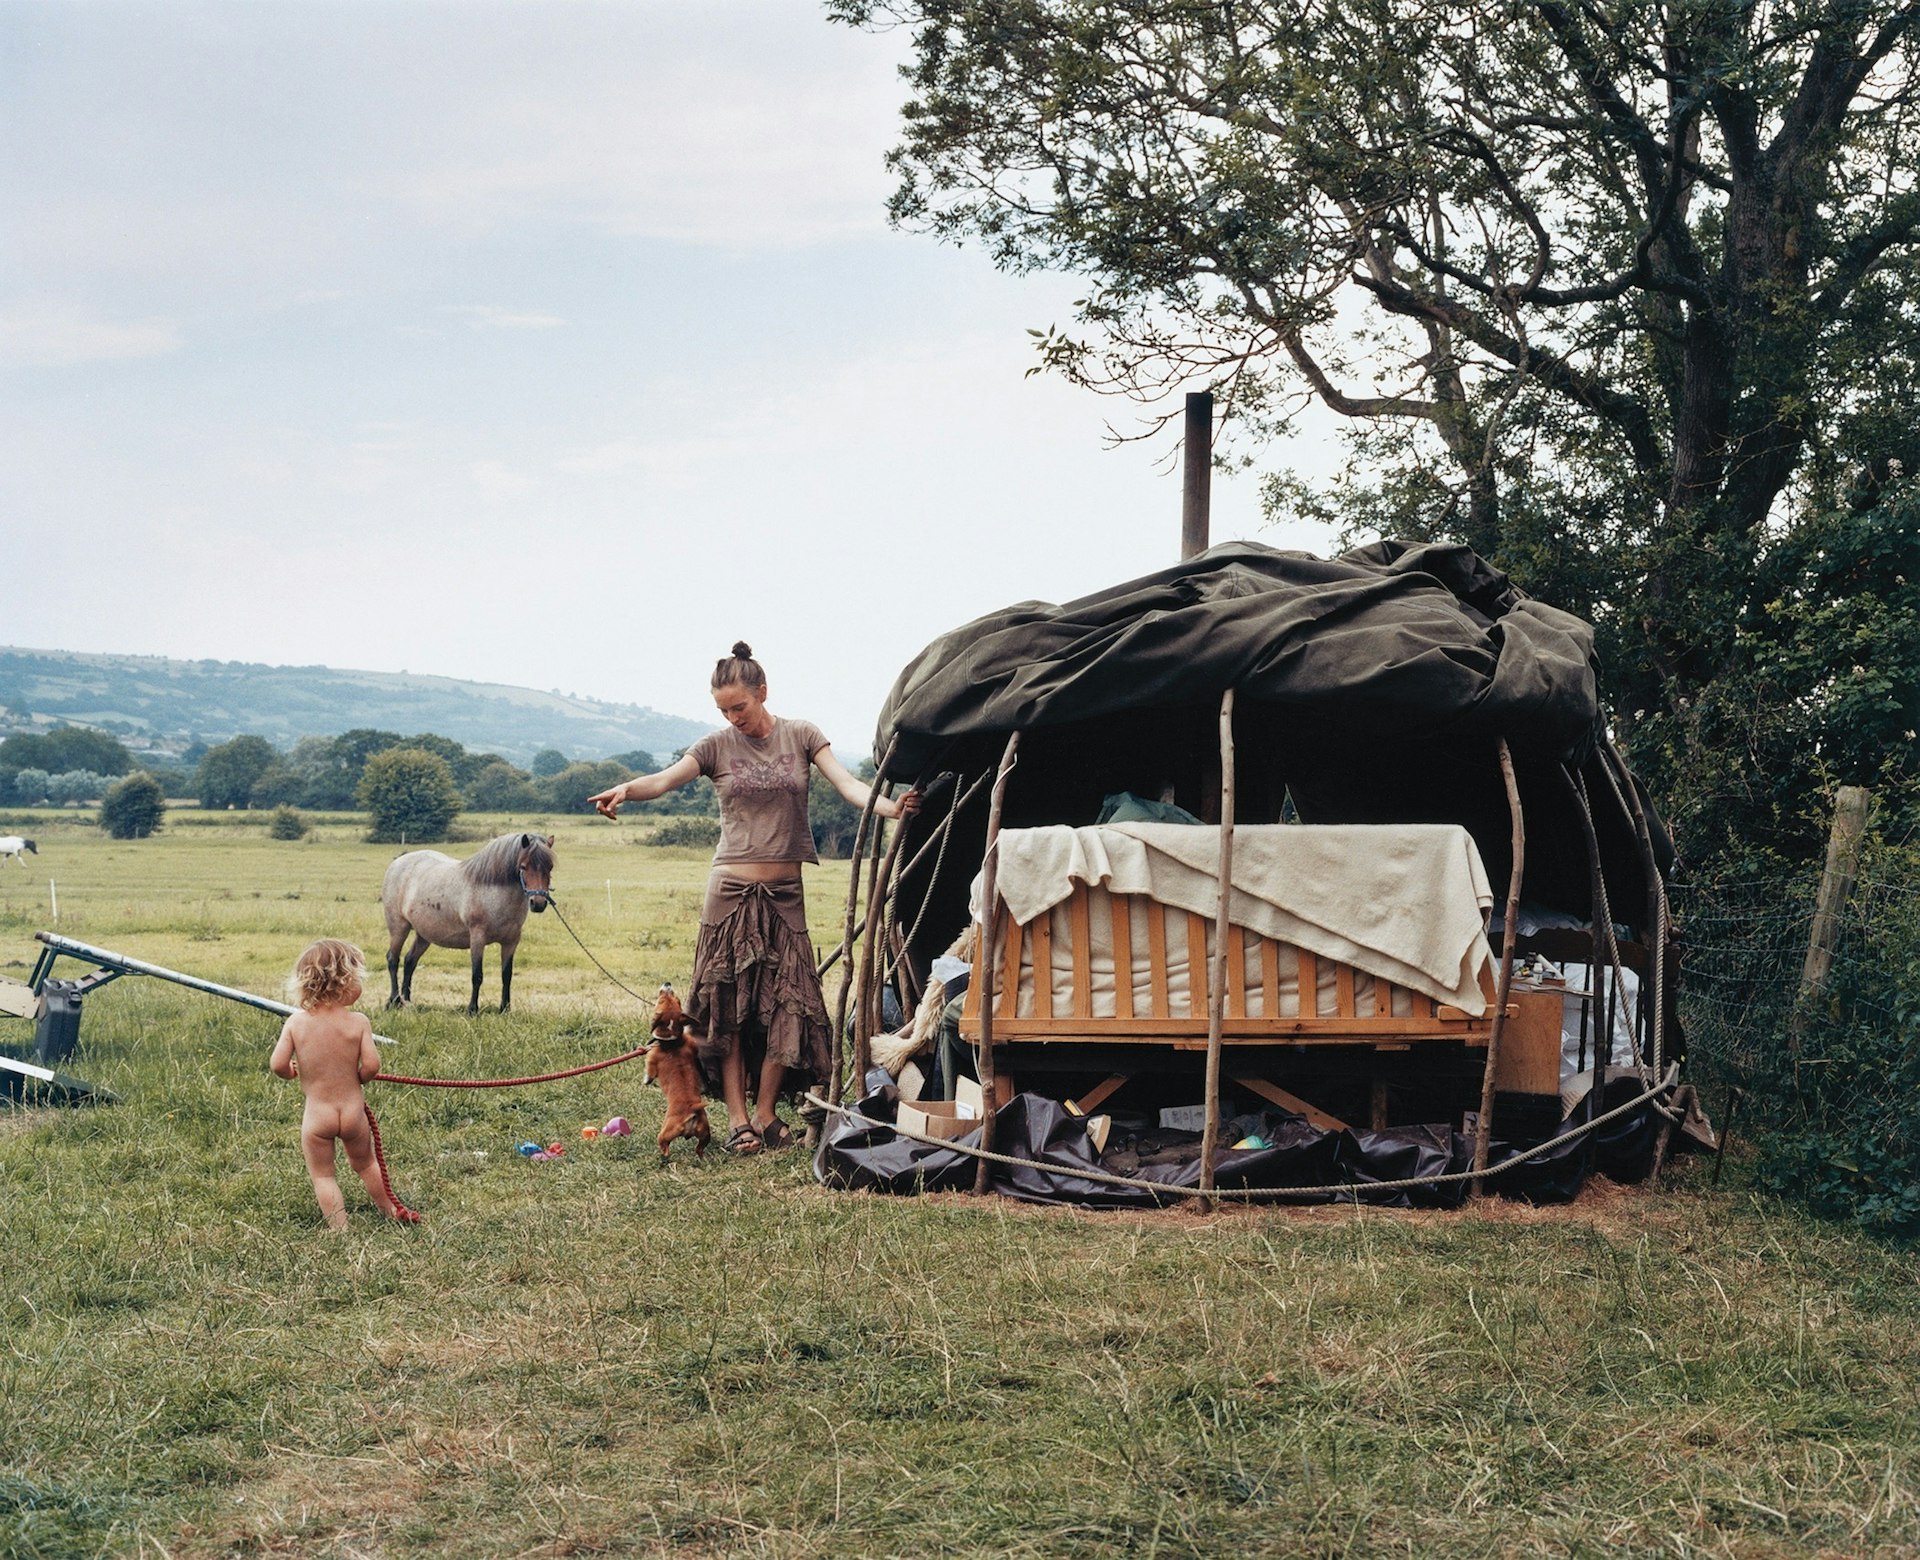 Documenting alternative ways of life in the British countryside